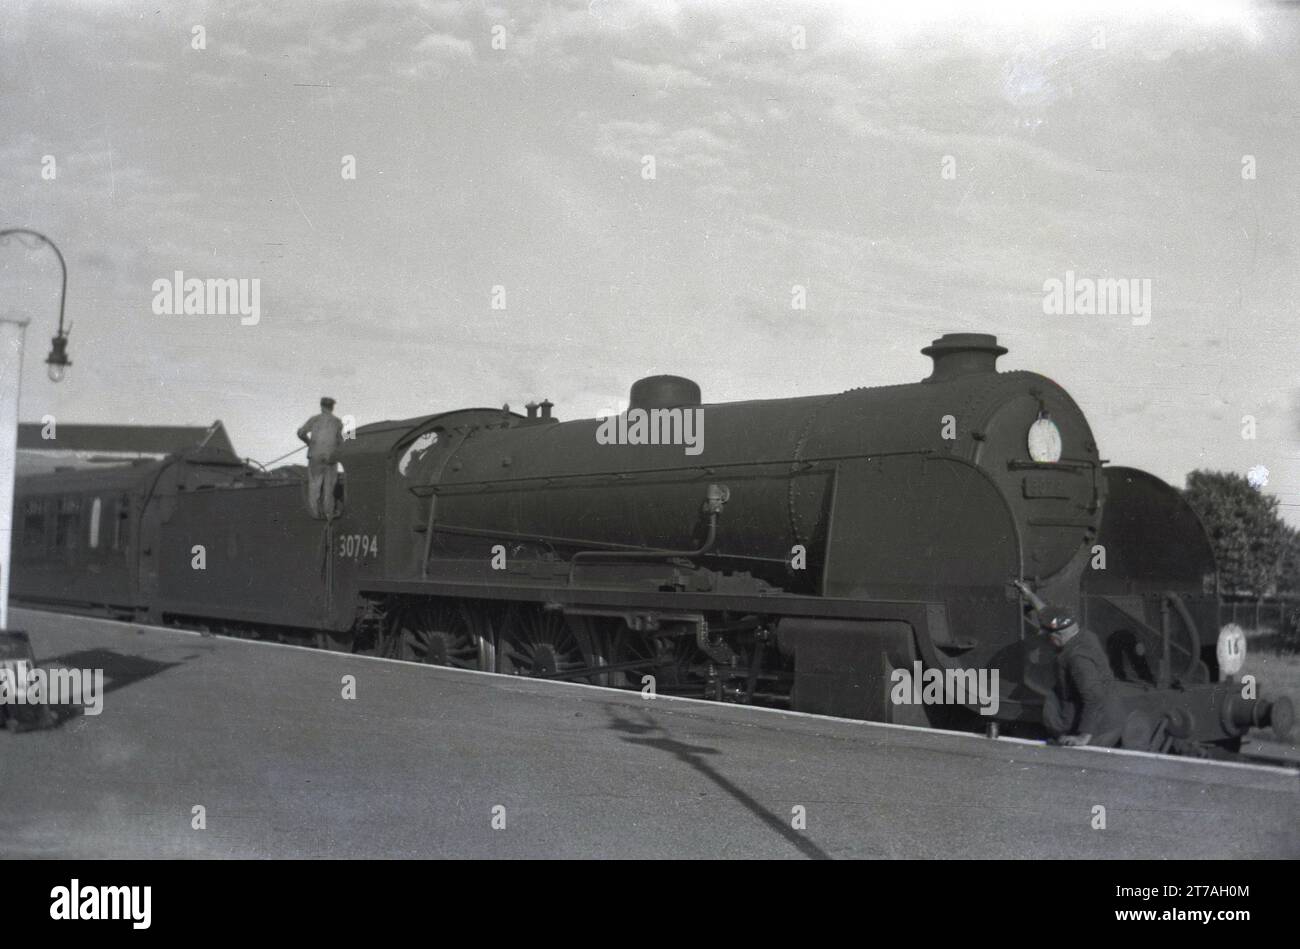 1950s, historical, a steam locomotive of the era, 30794, waiting at a railway platform, England, UK. The 4-6-0 King Arthur Class locomotive entered service in 1926 for Southern Railways (794) before being renumbered 30794 when British Railways was formed in 1949. She was withdrawn in 1960. Stock Photo